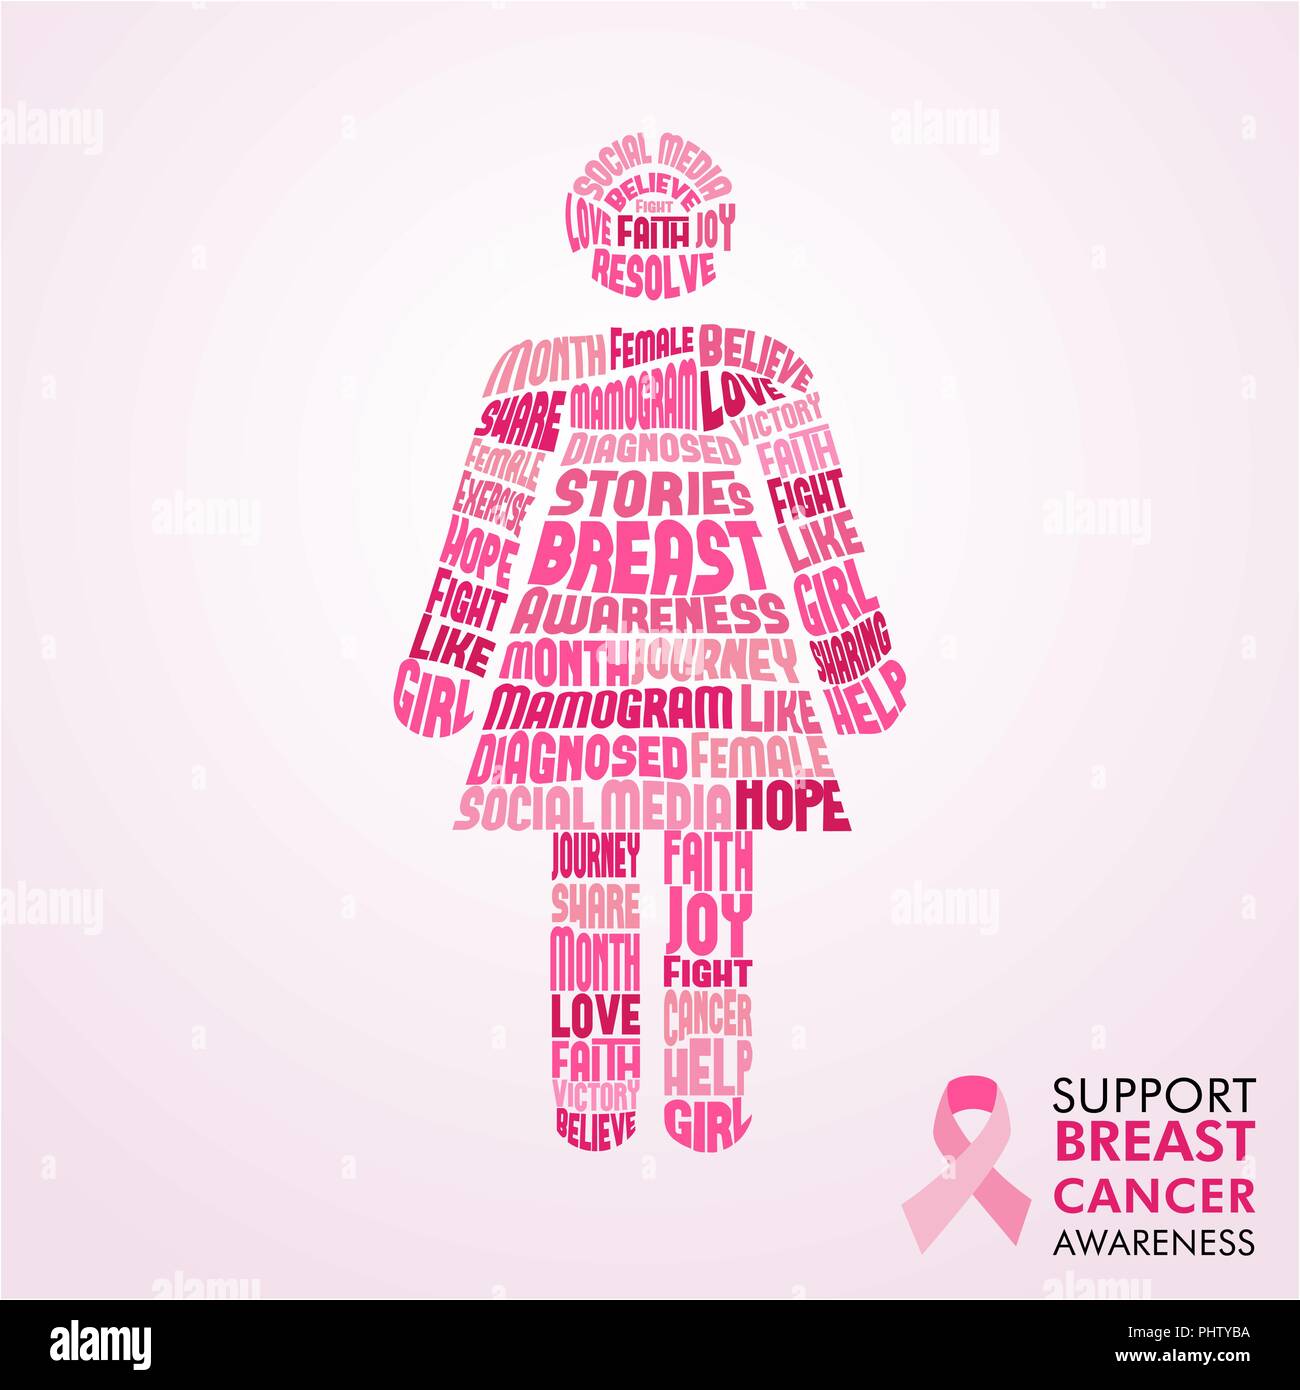 https://c8.alamy.com/comp/PHTYBA/breast-cancer-awareness-month-girl-silhouette-design-made-of-powerful-words-for-survivor-women-love-and-support-concept-illustration-eps10-vector-PHTYBA.jpg